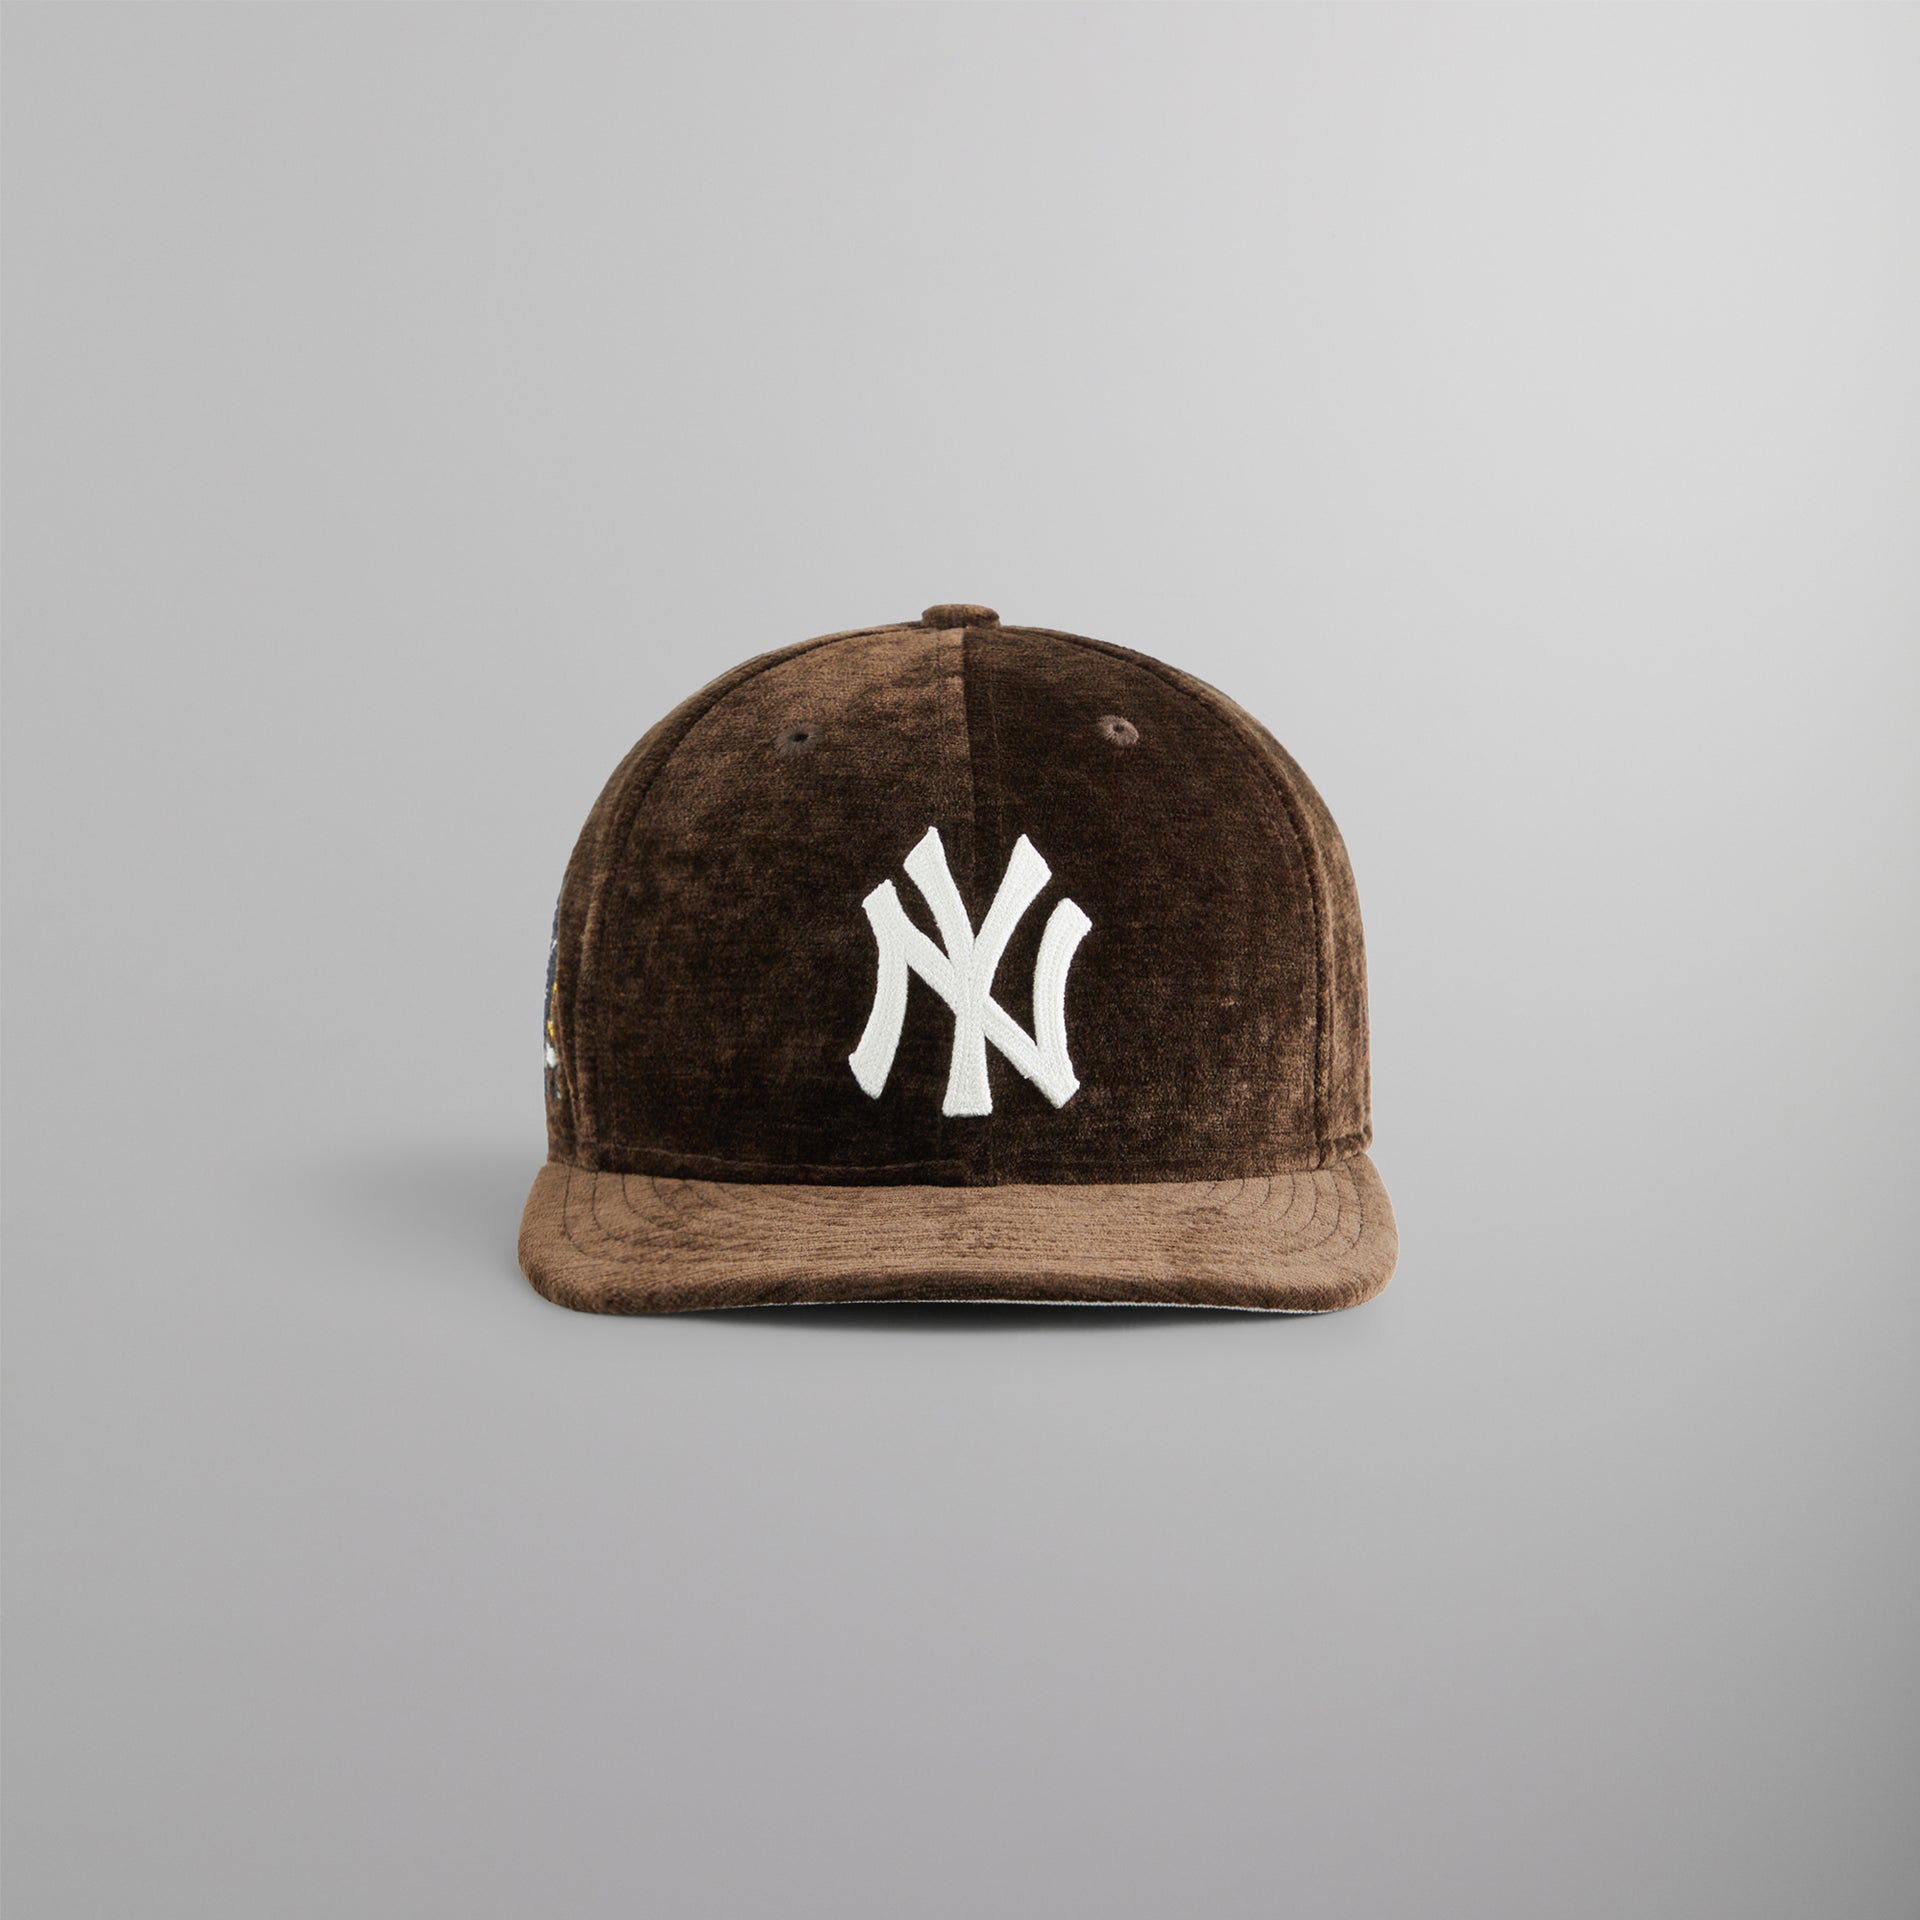 Erlebniswelt-fliegenfischenShops & New Era for the New York Yankees Chenille Chainstitch 59FIFTY Low Profile - Kindling